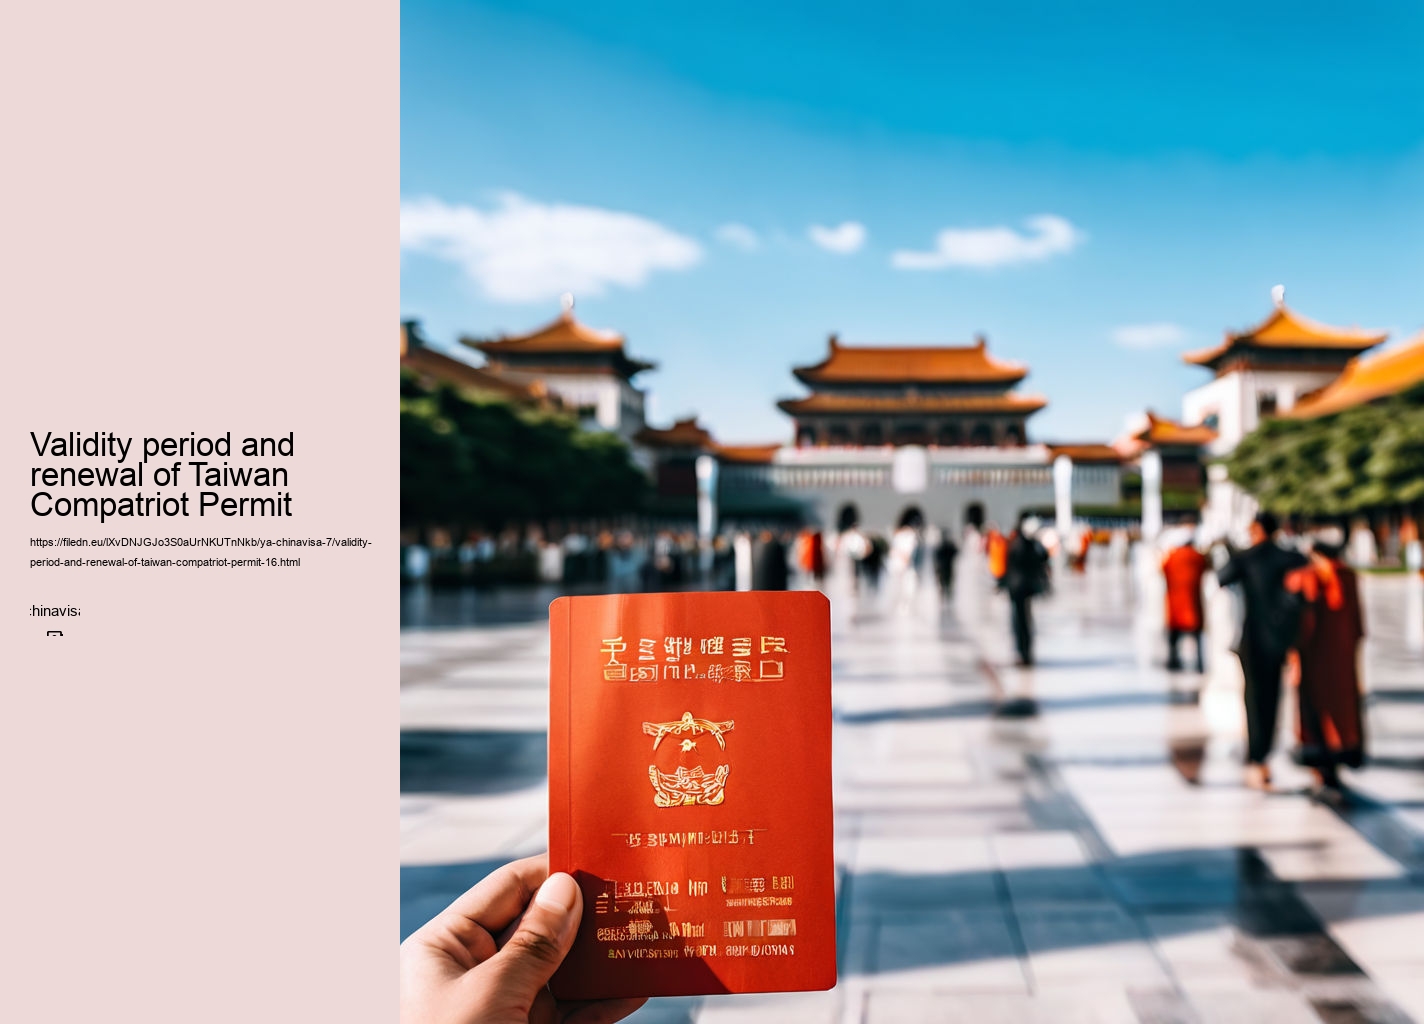 Validity period and renewal of Taiwan Compatriot Permit